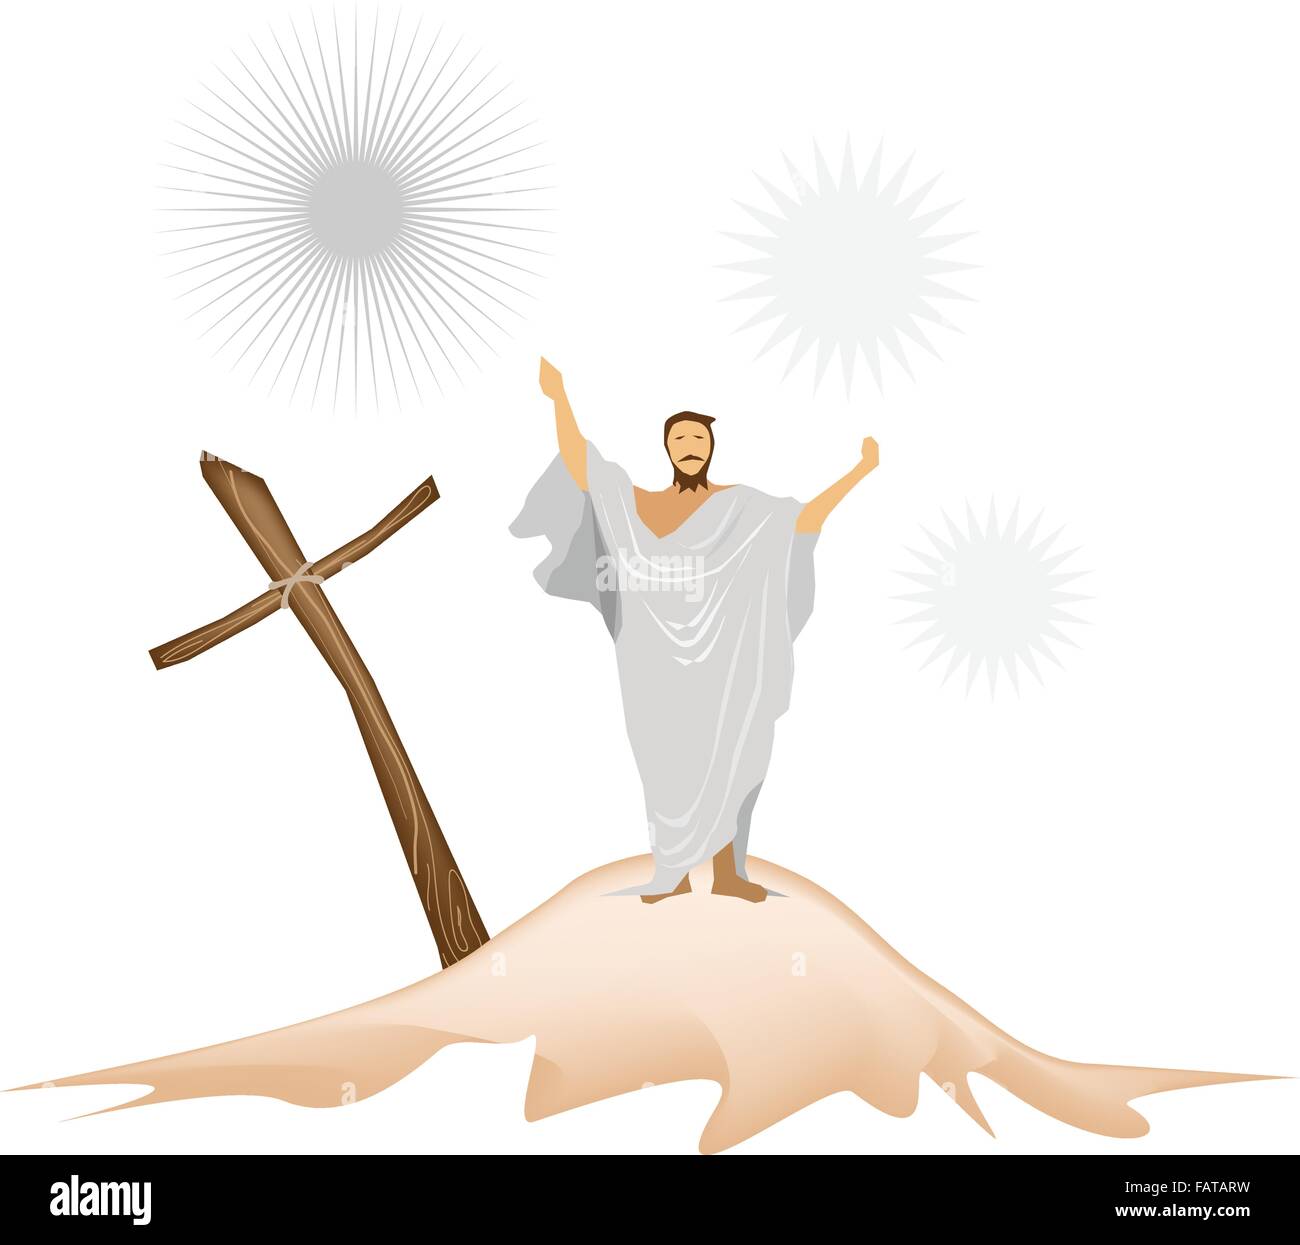 An Illustration of Jesus Christ Standing with A Wooden Cross and Praying for People on A Mountain Stock Vector